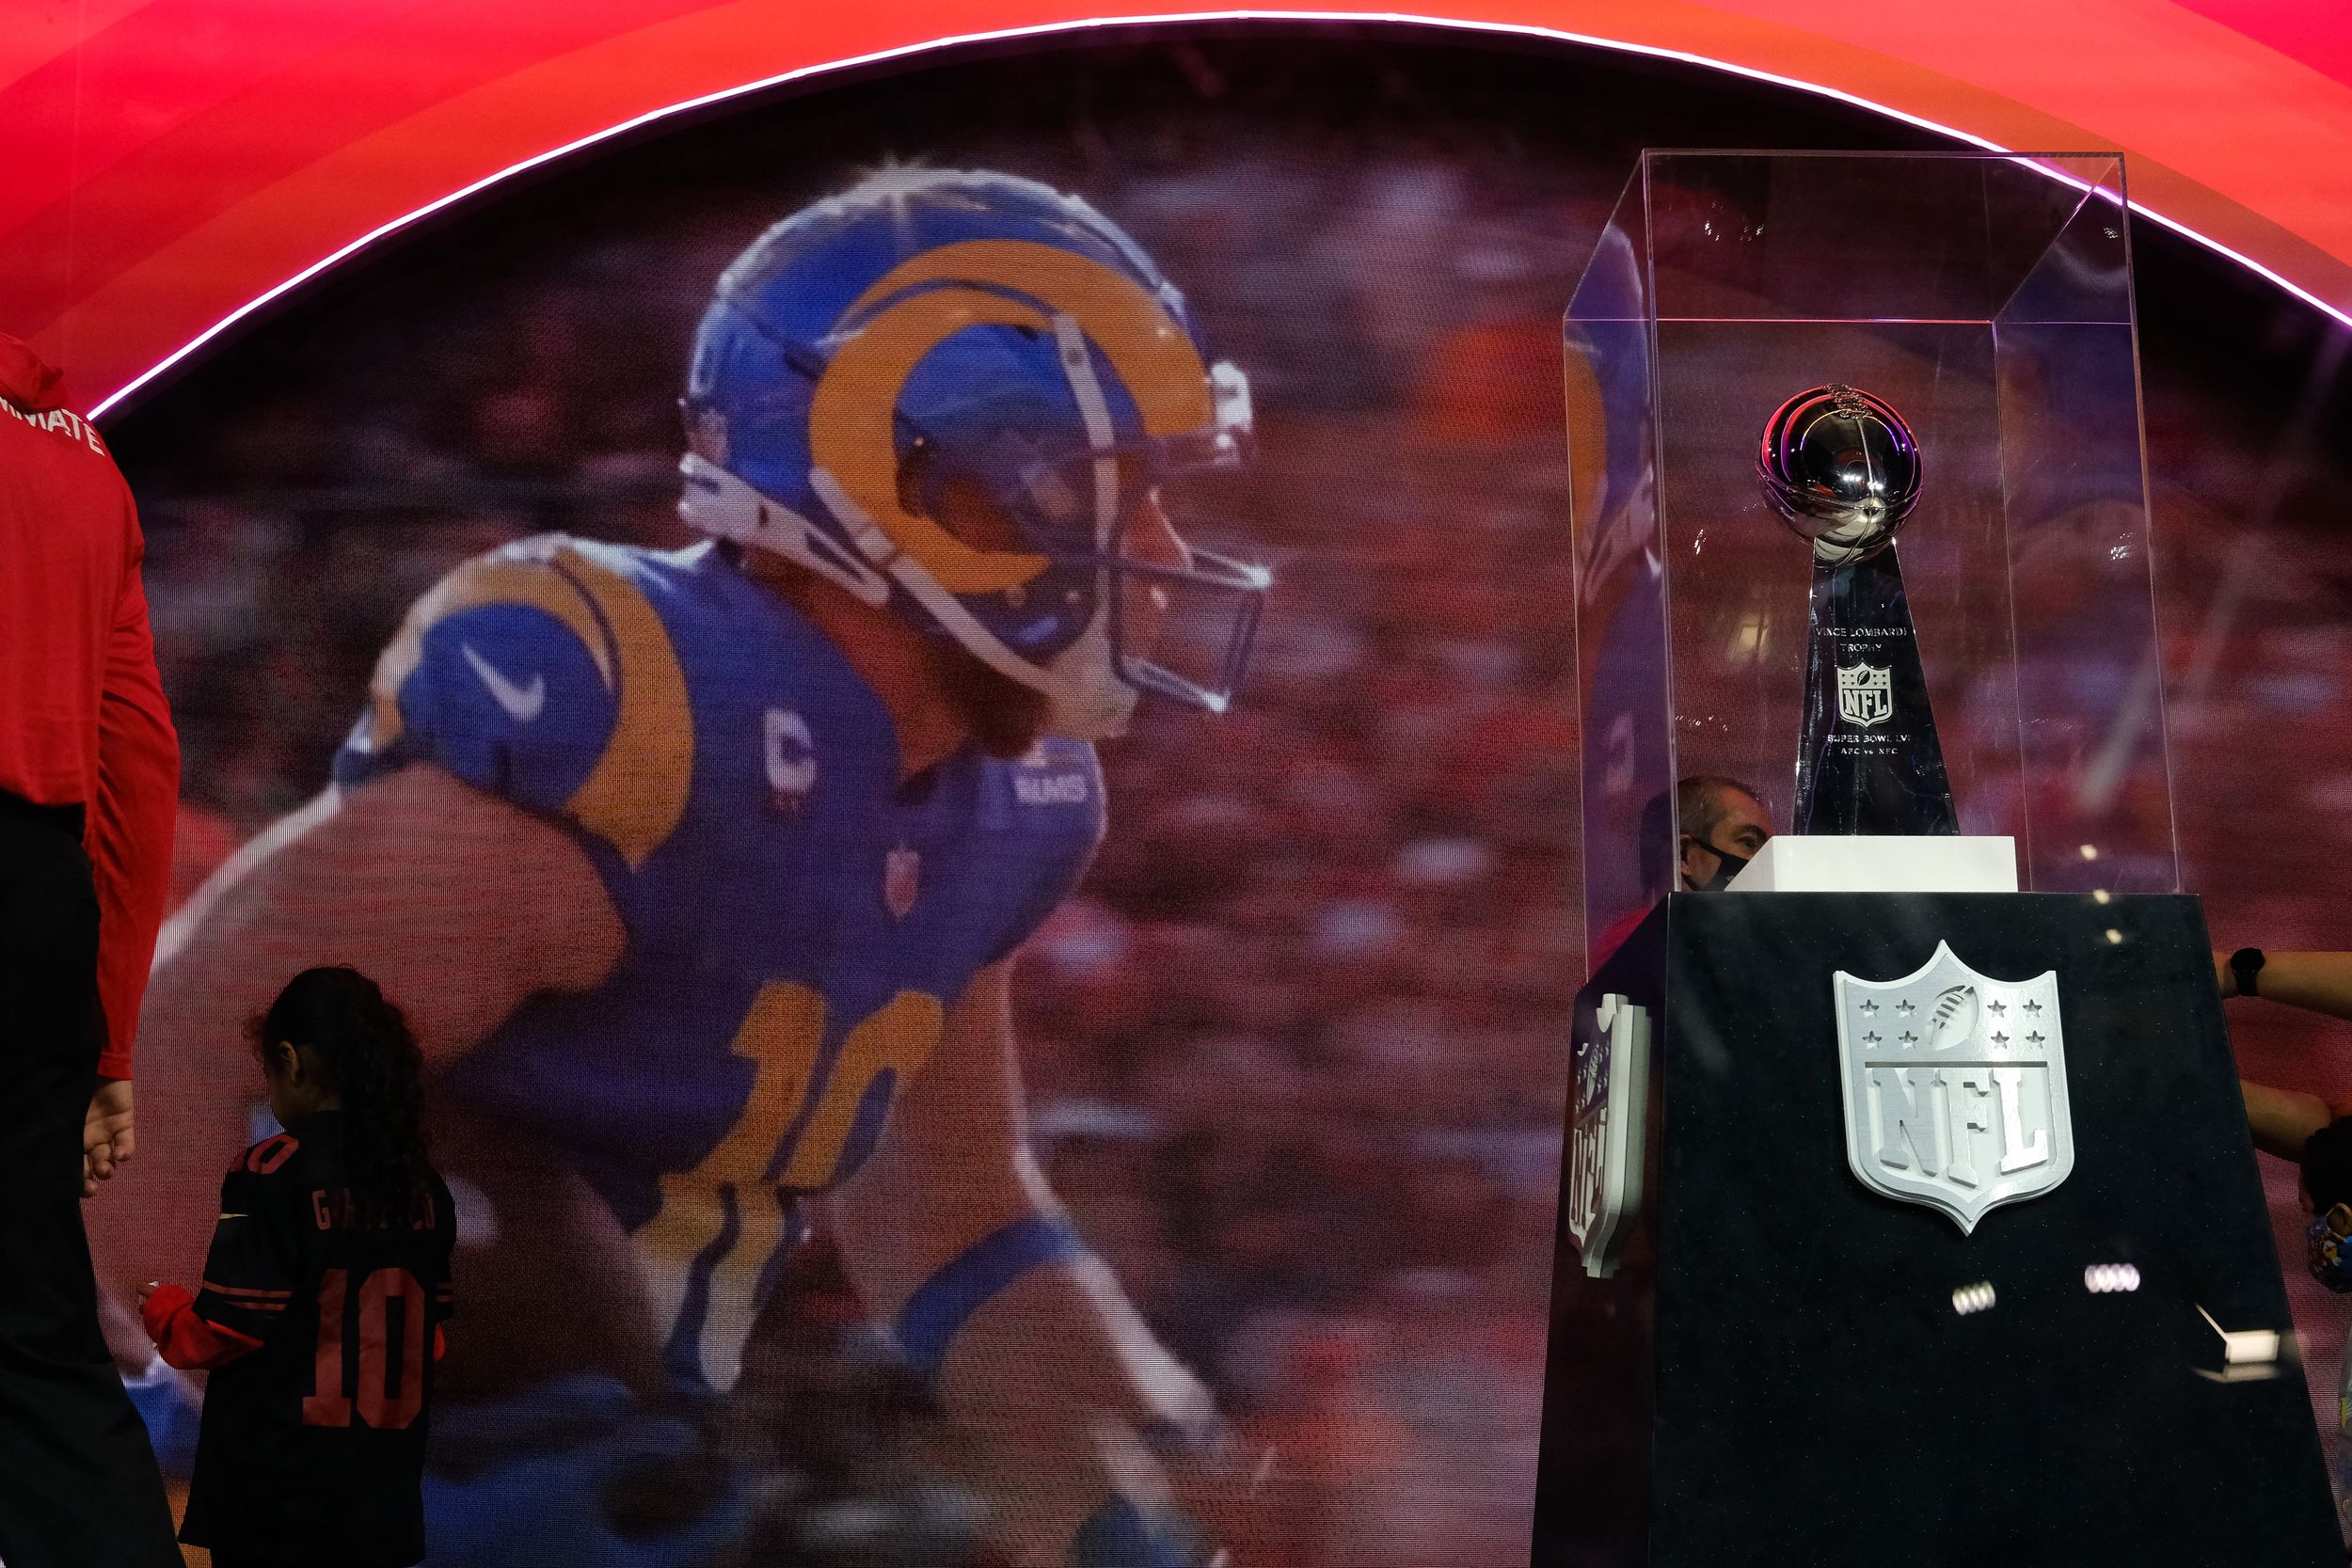 NFL offers fans chance to host Vince Lombardi Trophy in their hometown